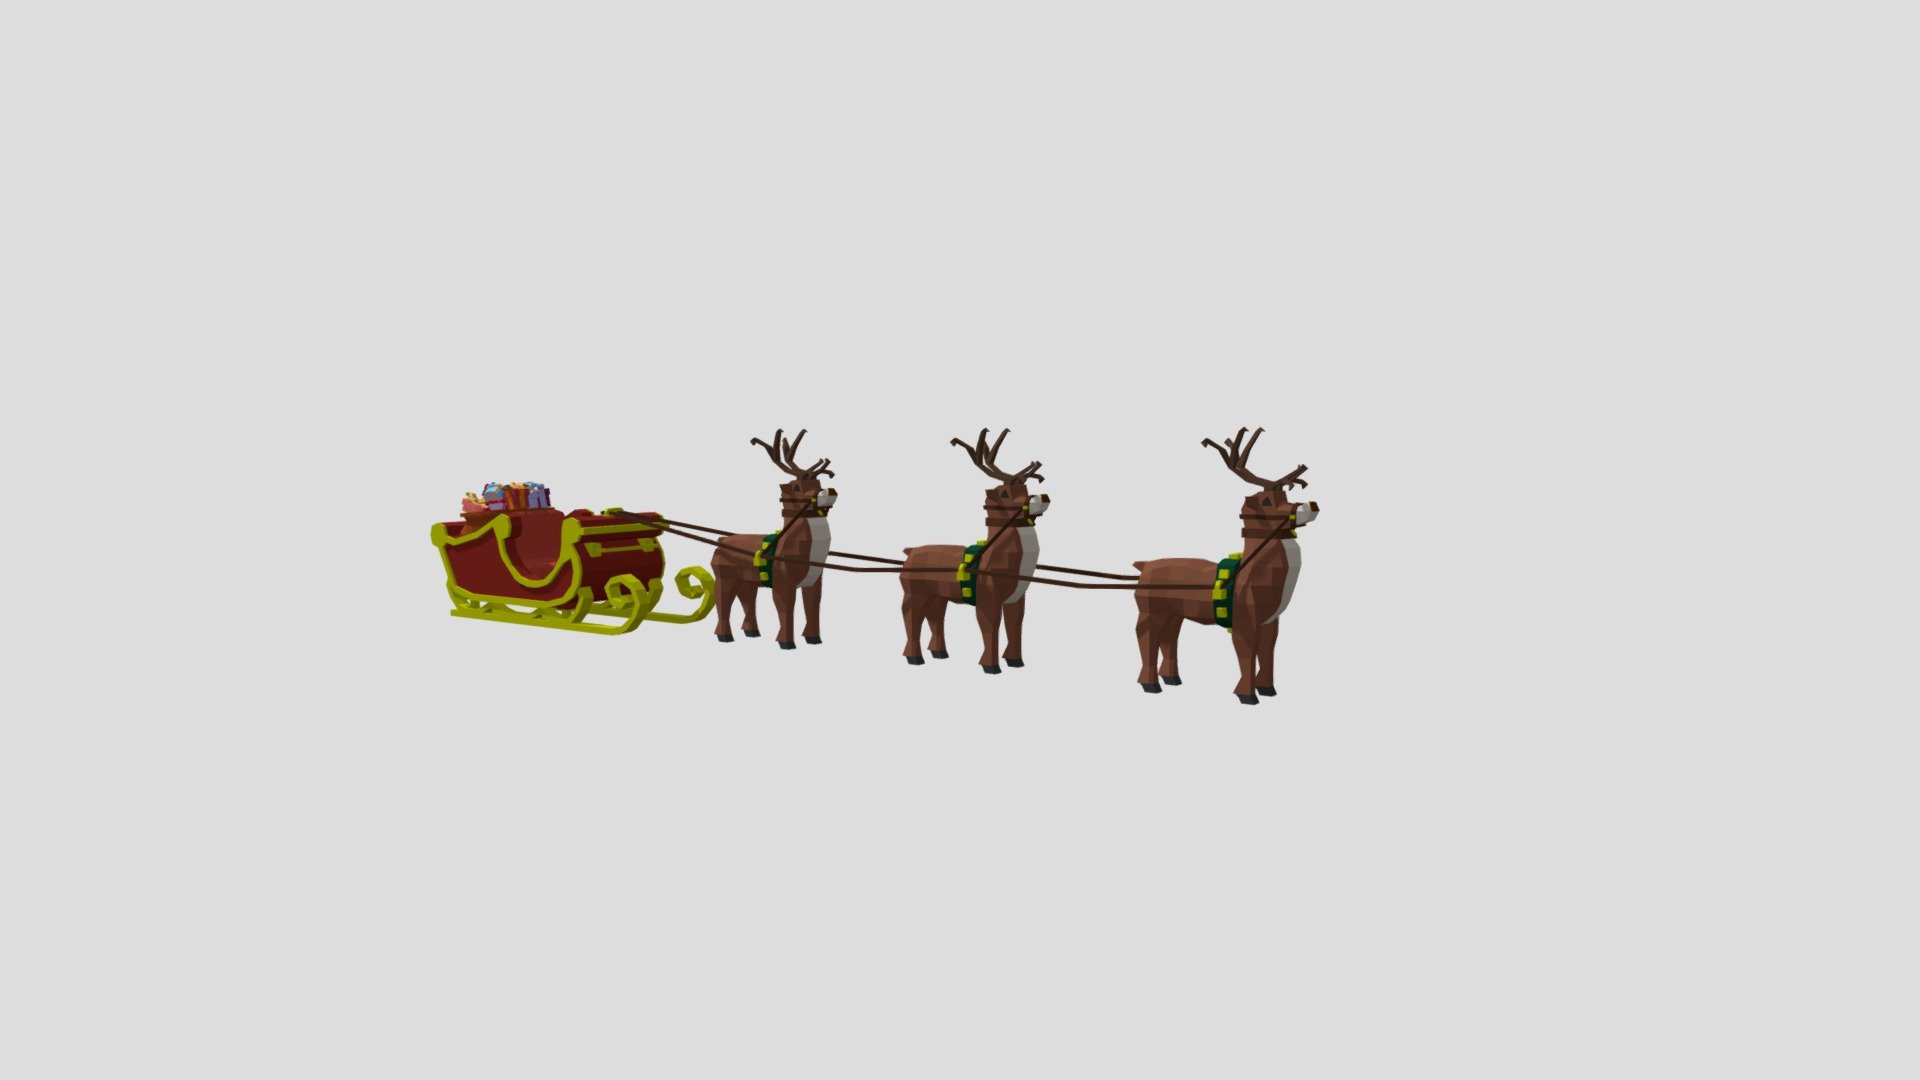 Small creation from last year 10/17/2020 

Check watch this short animation video, I built this sleigh for that reason!
https://youtu.be/0zcA5SSniXw

Created on Blender in the theme of KoGaMa.

See more on my Instagram: https://www.instagram.com/anael_kgm/

And thank you to follow my work! - Santa Sleigh Reindeers Gifts - 3D model by Anael (@anaelG) 3d model